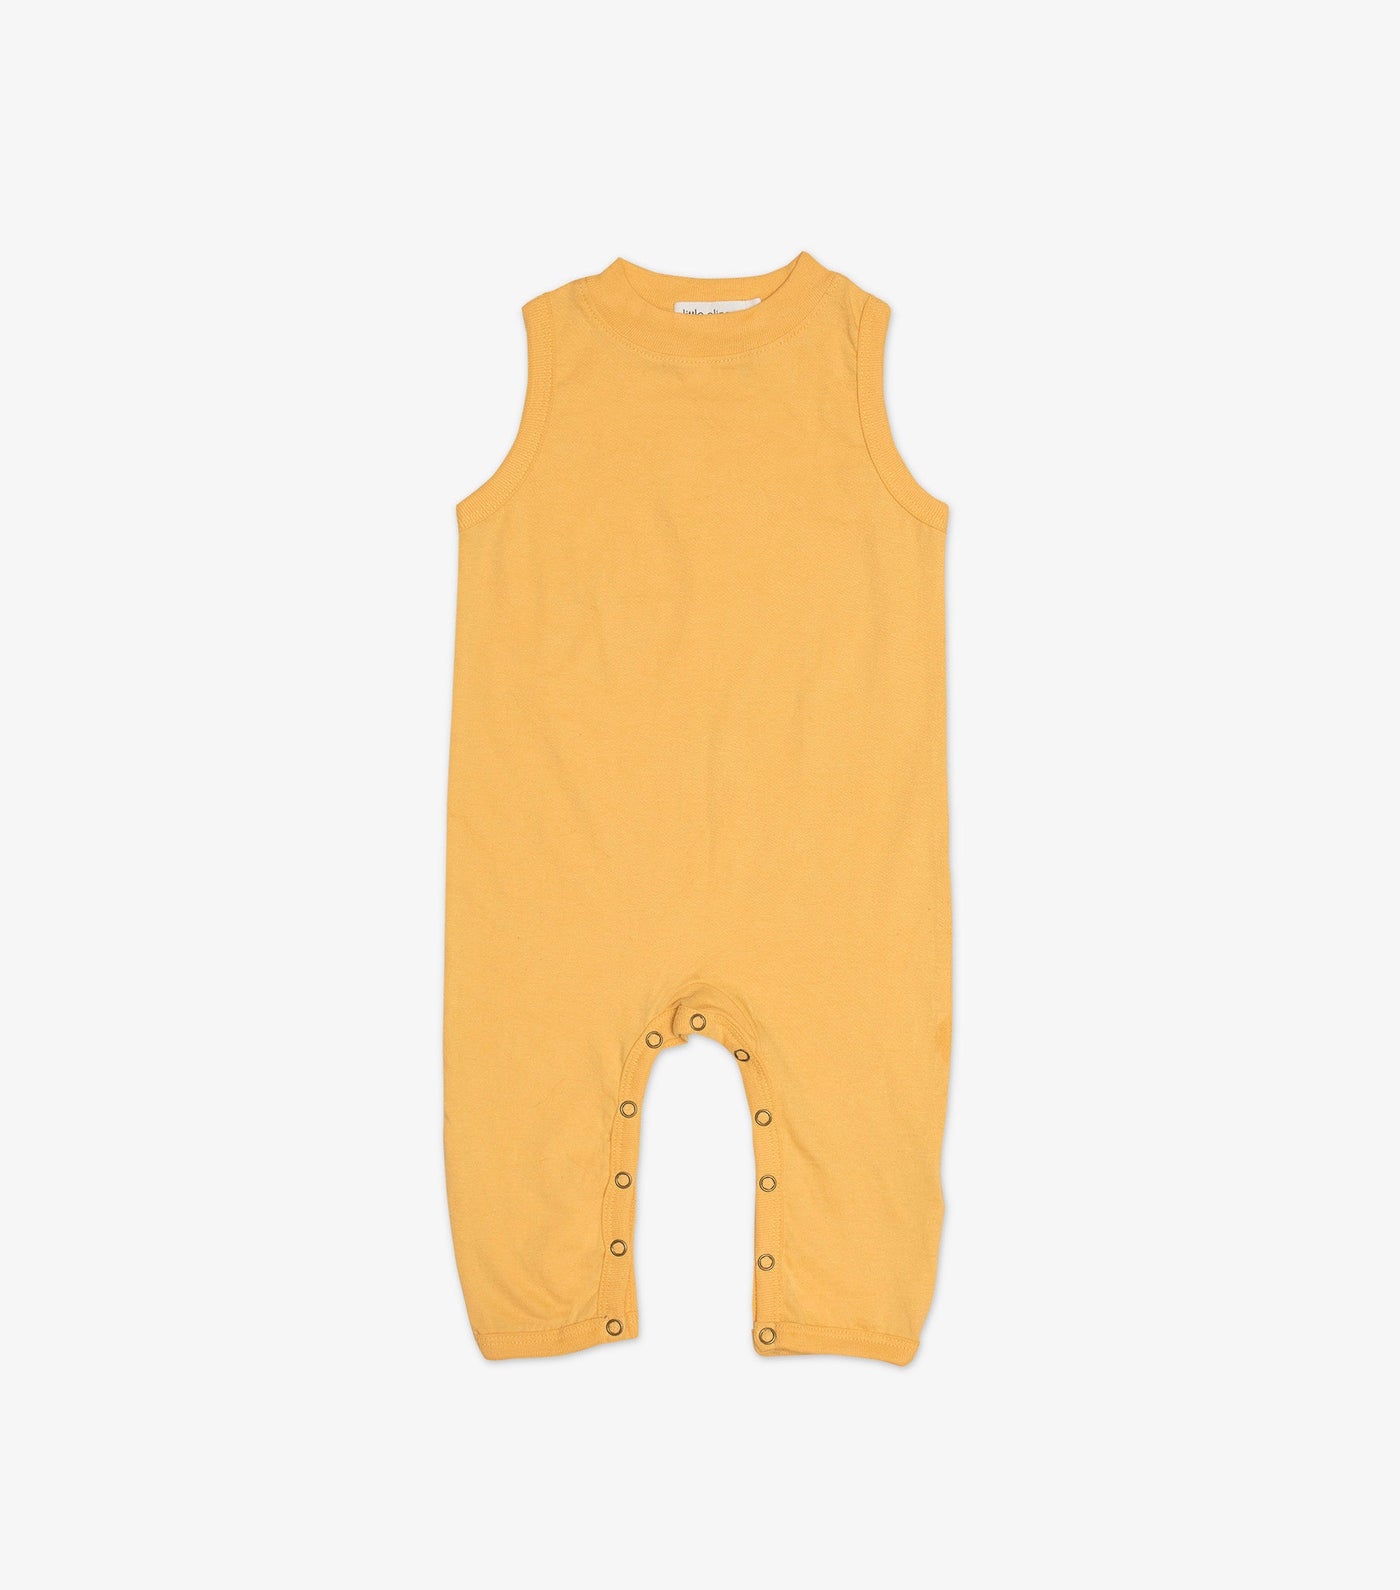 5 Pack of Baby Rompers